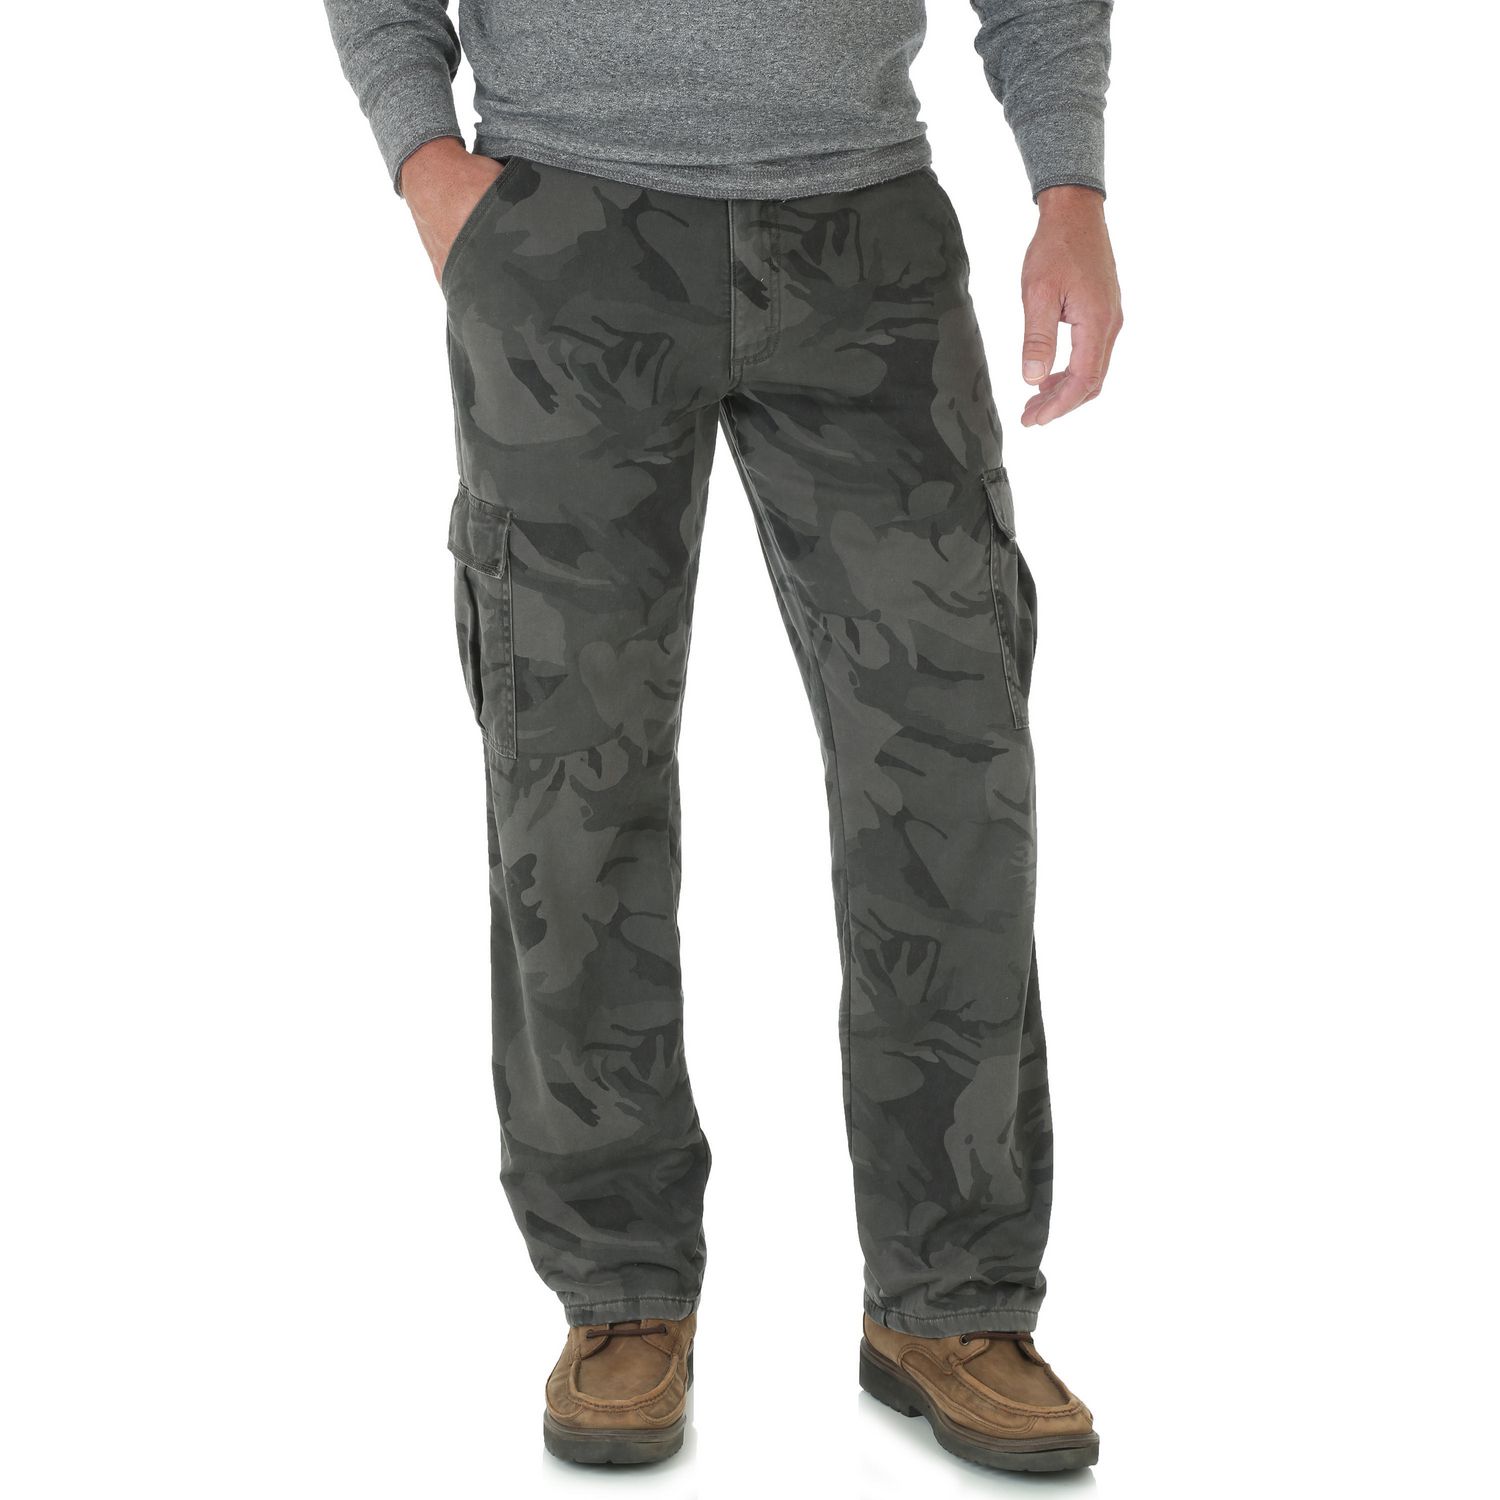 Wrangler Insulated Camo Pants | peacecommission.kdsg.gov.ng